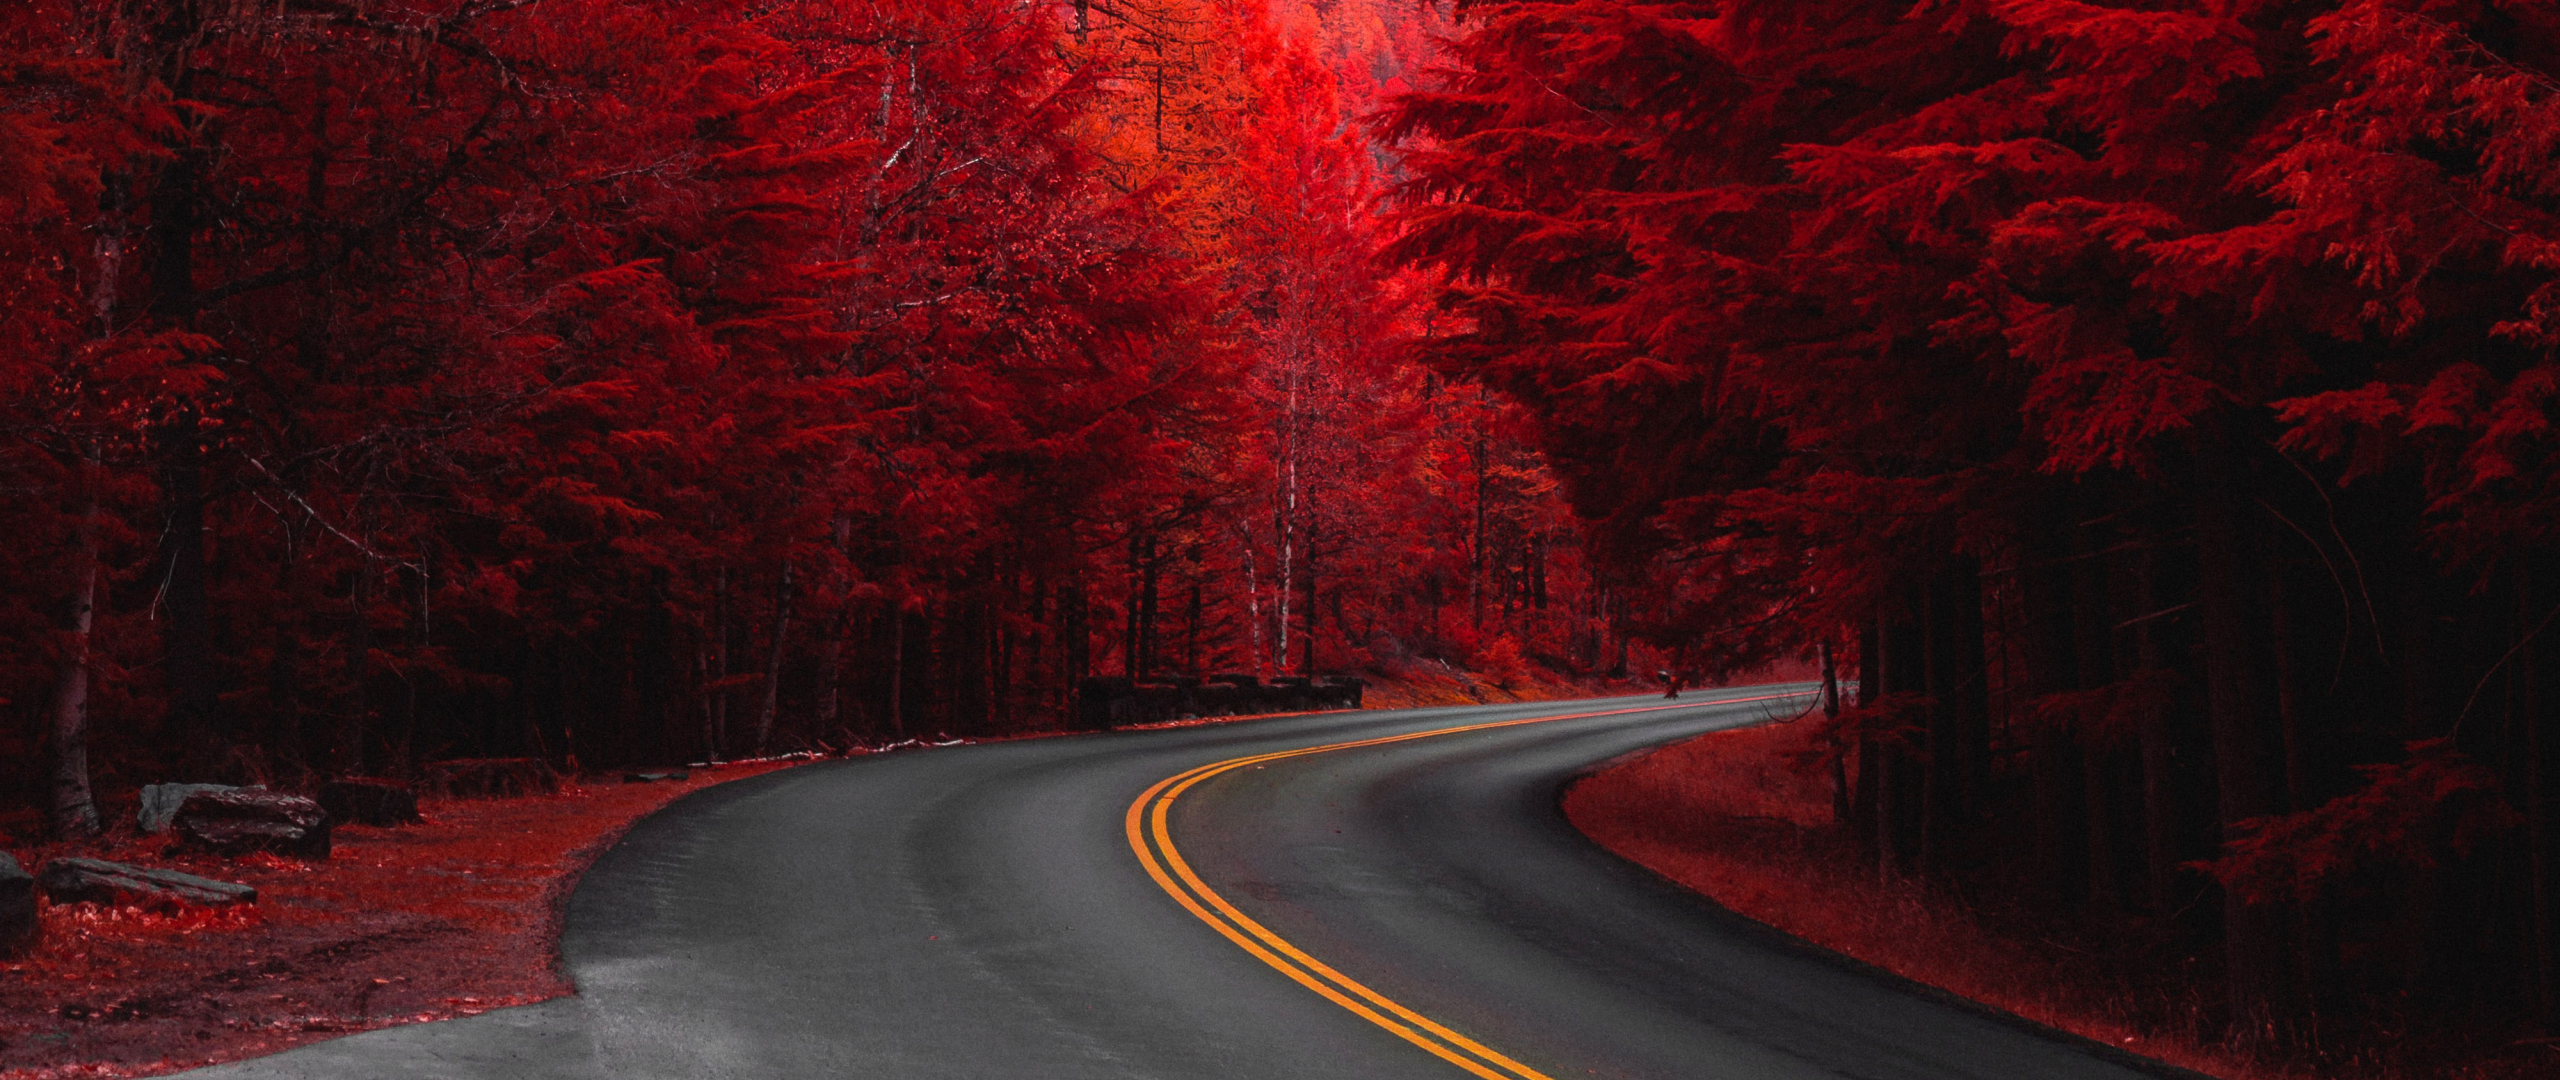 Download wallpaper 2560x1080 road through pine trees, red, dual wide 2560x1080 HD background, 23925